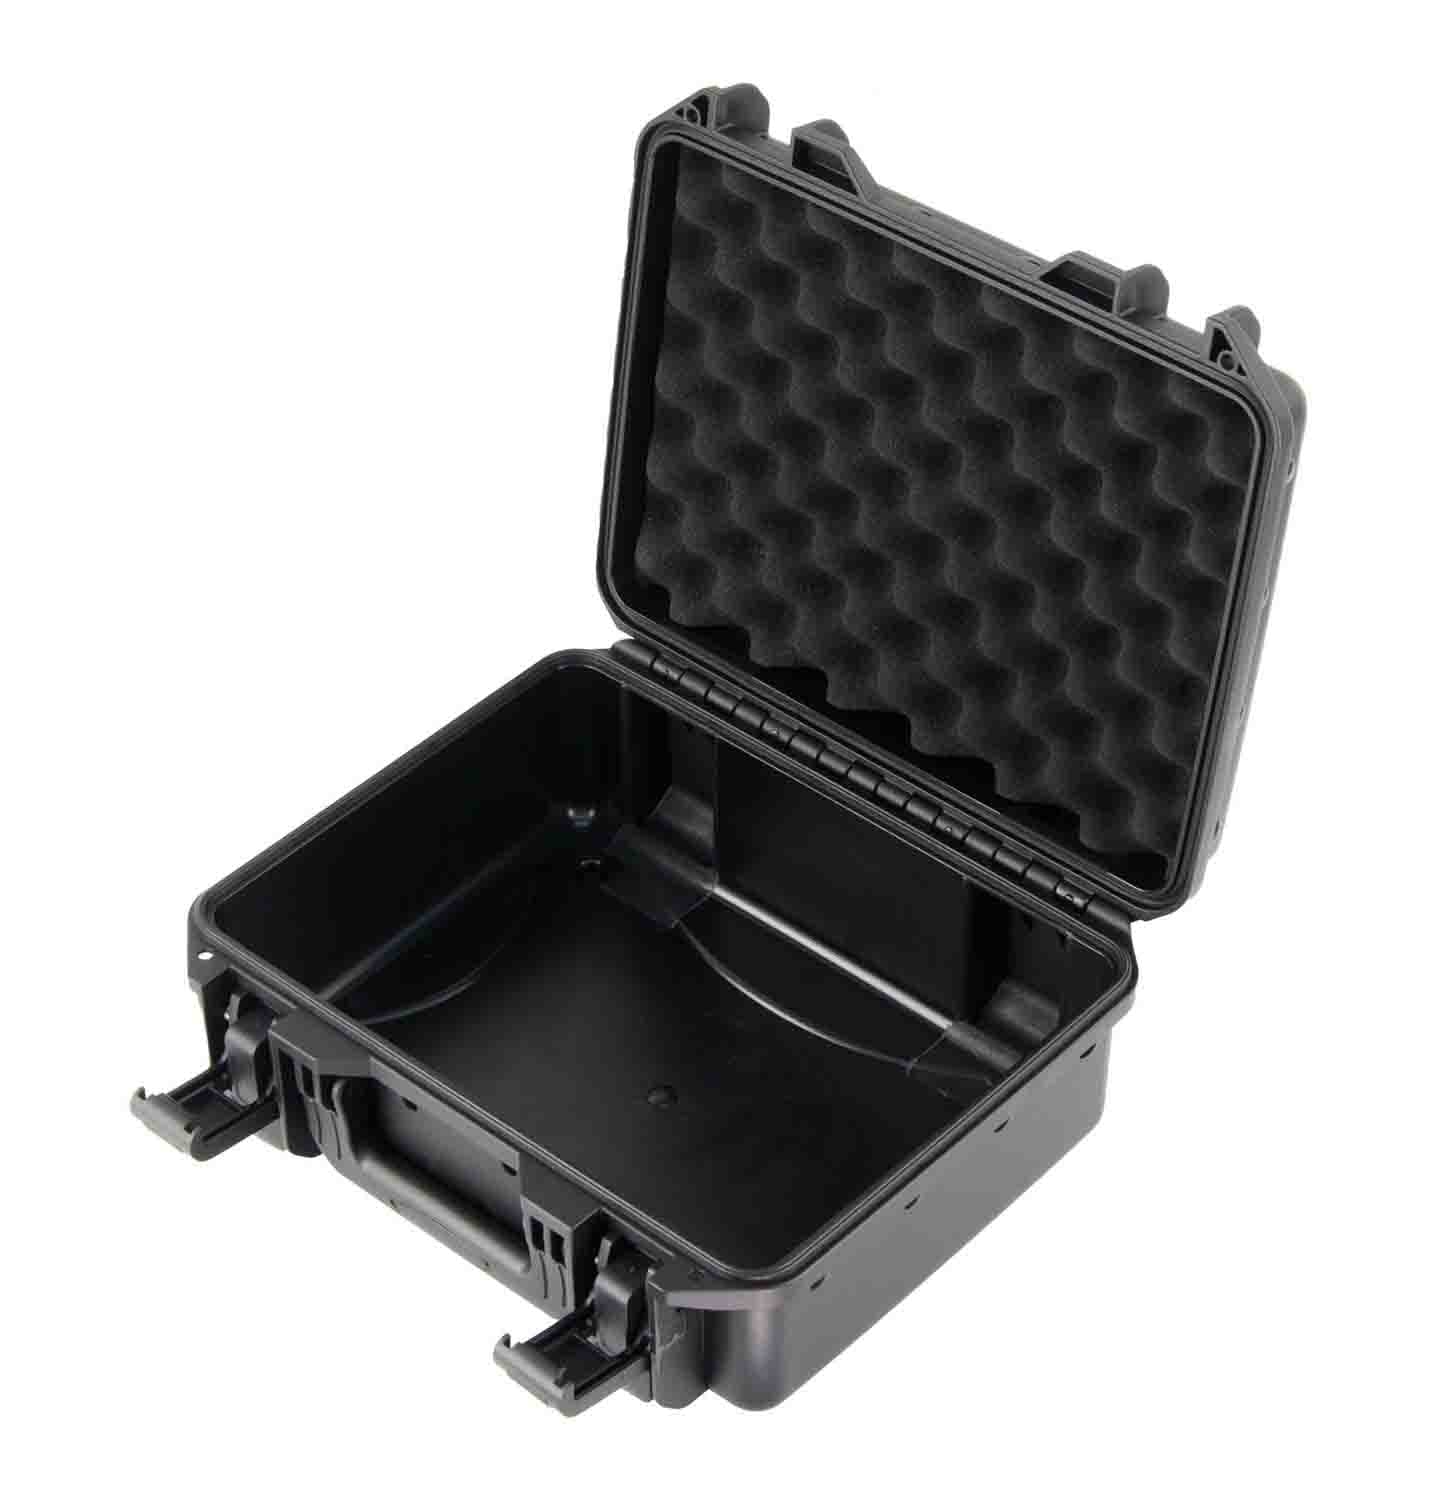 Odyssey VU131105NF Vulcan Injection-Molded Utility Case - 13 x 9.5 x 3.75" Interior - Hollywood DJ